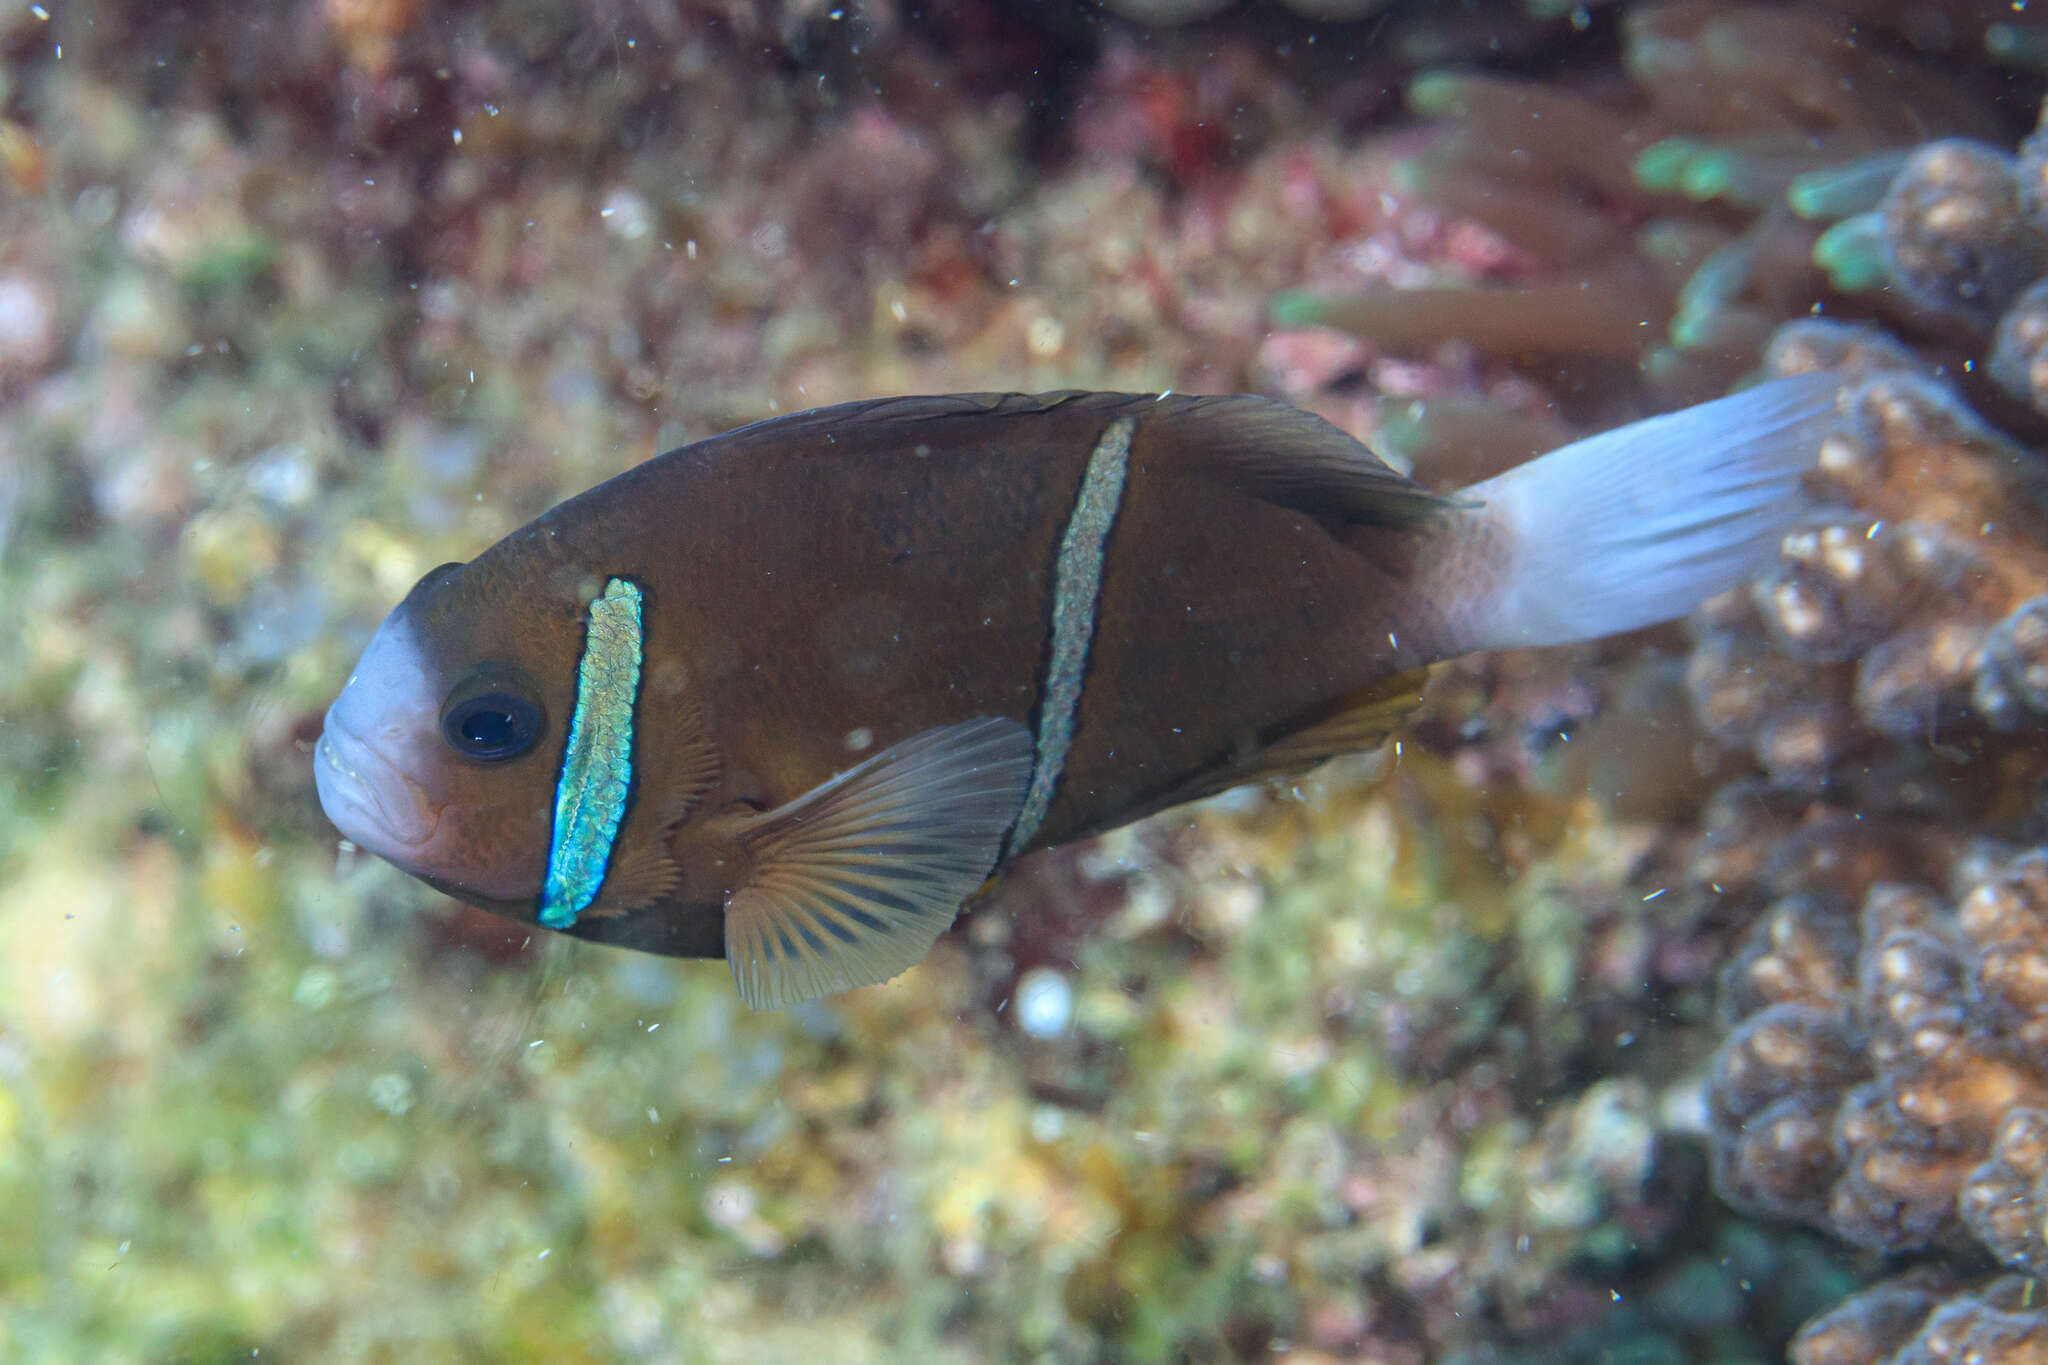 Image of Barrier Reef Anemonefish